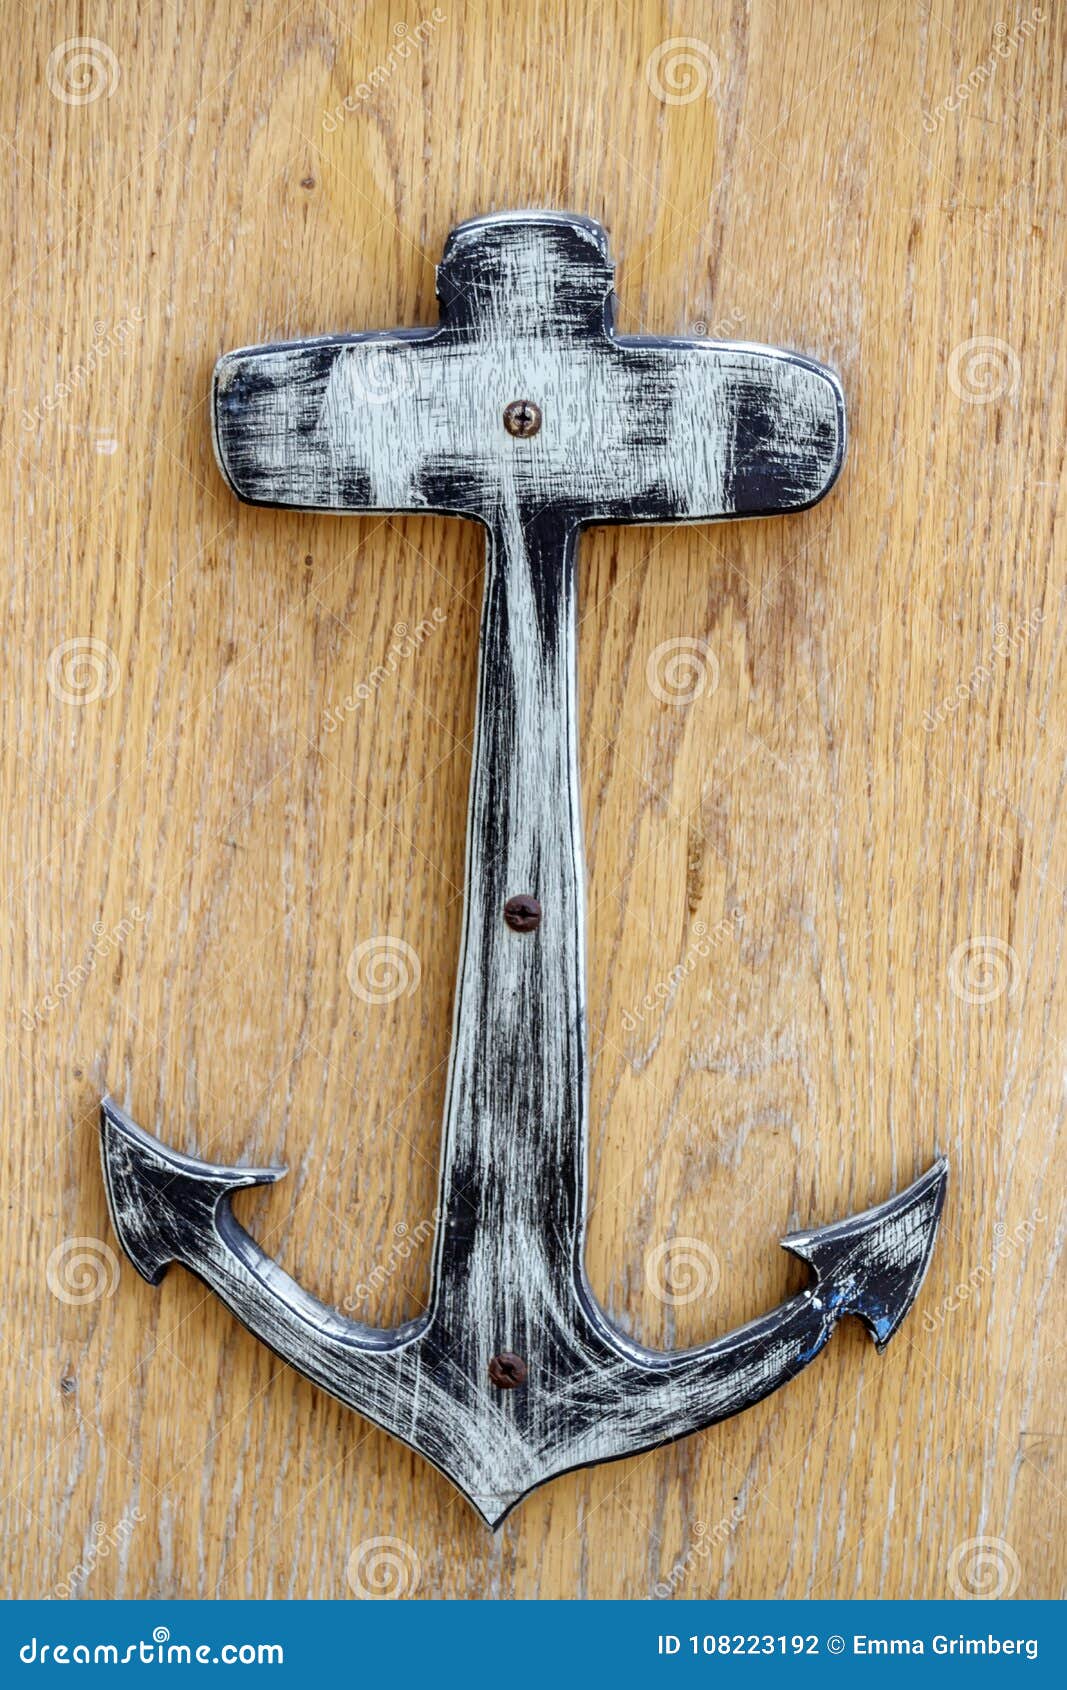 Wooden Stylized Anchor On A Wooden Board Stock Photo Image Of